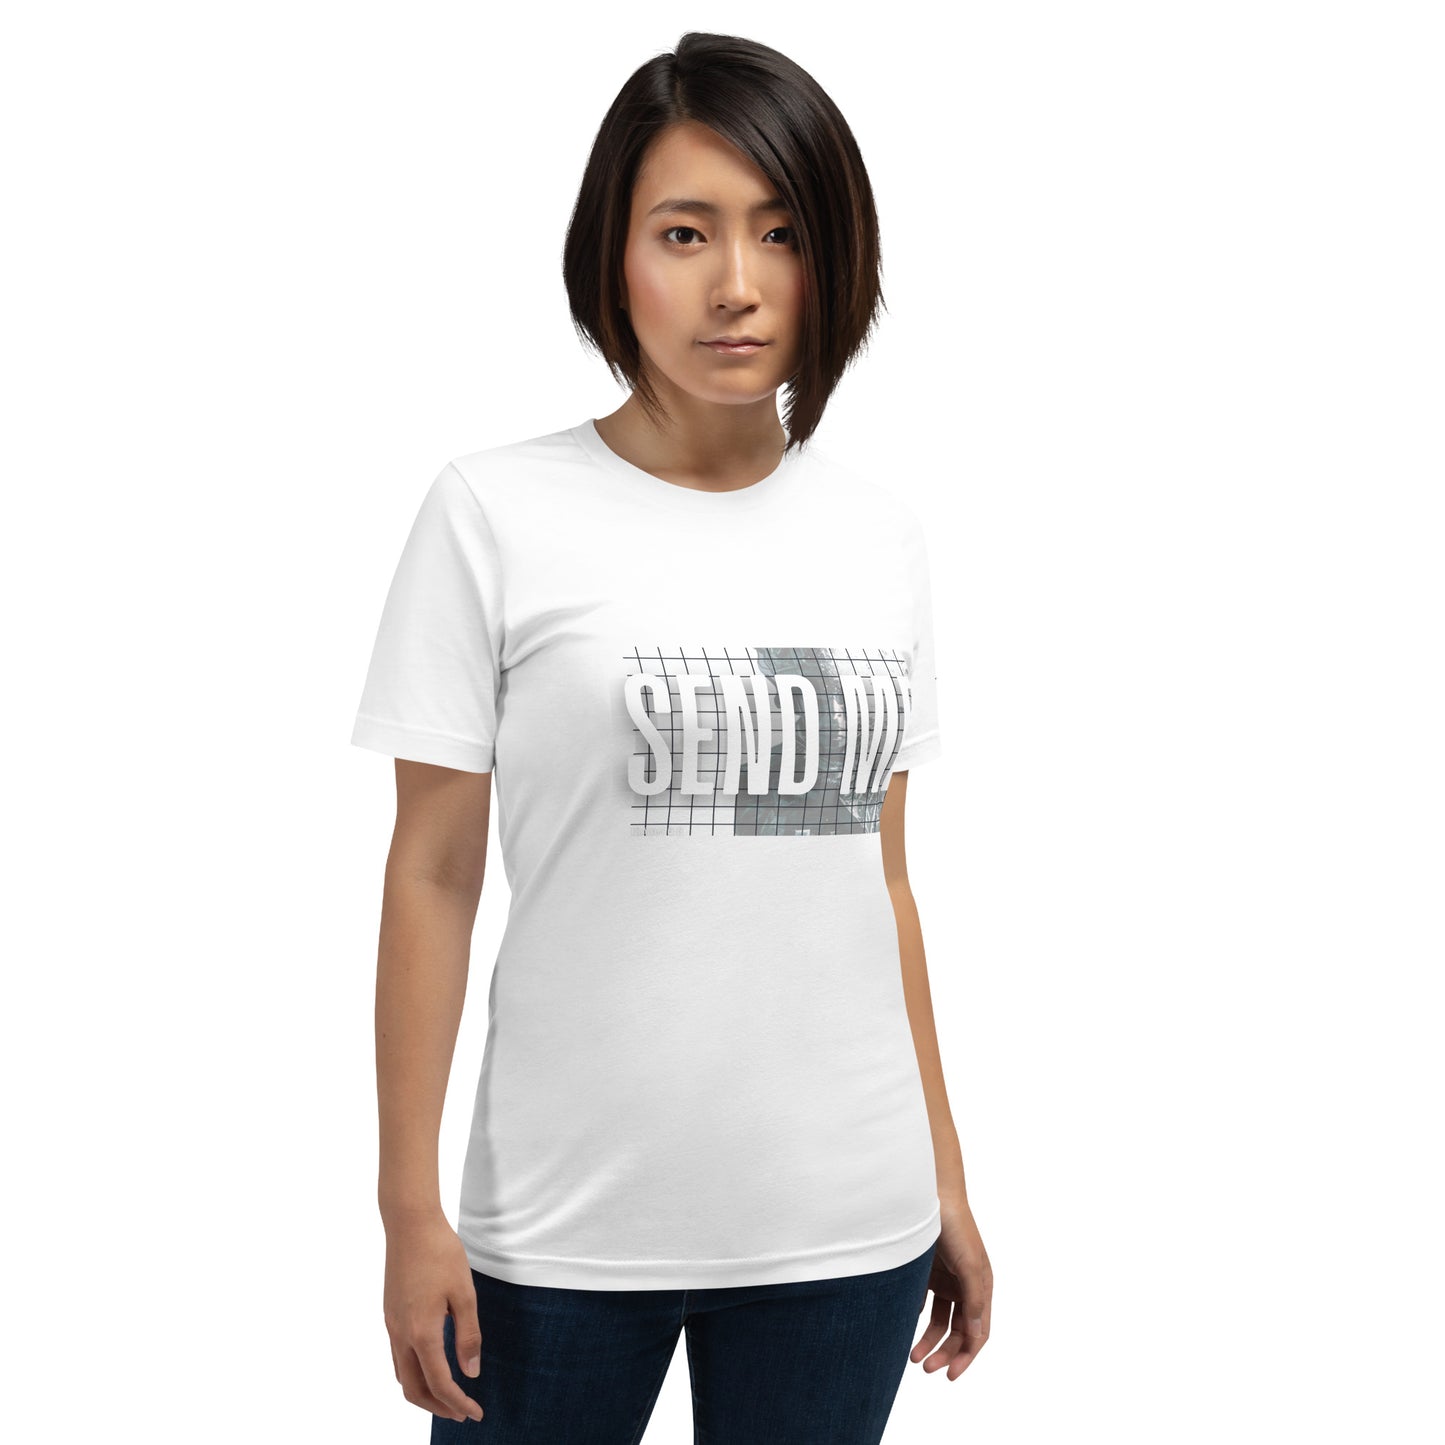 Send Me Isaiah 6:8 shirt, white graphic tee featuring a soldier. Men 's shirt.